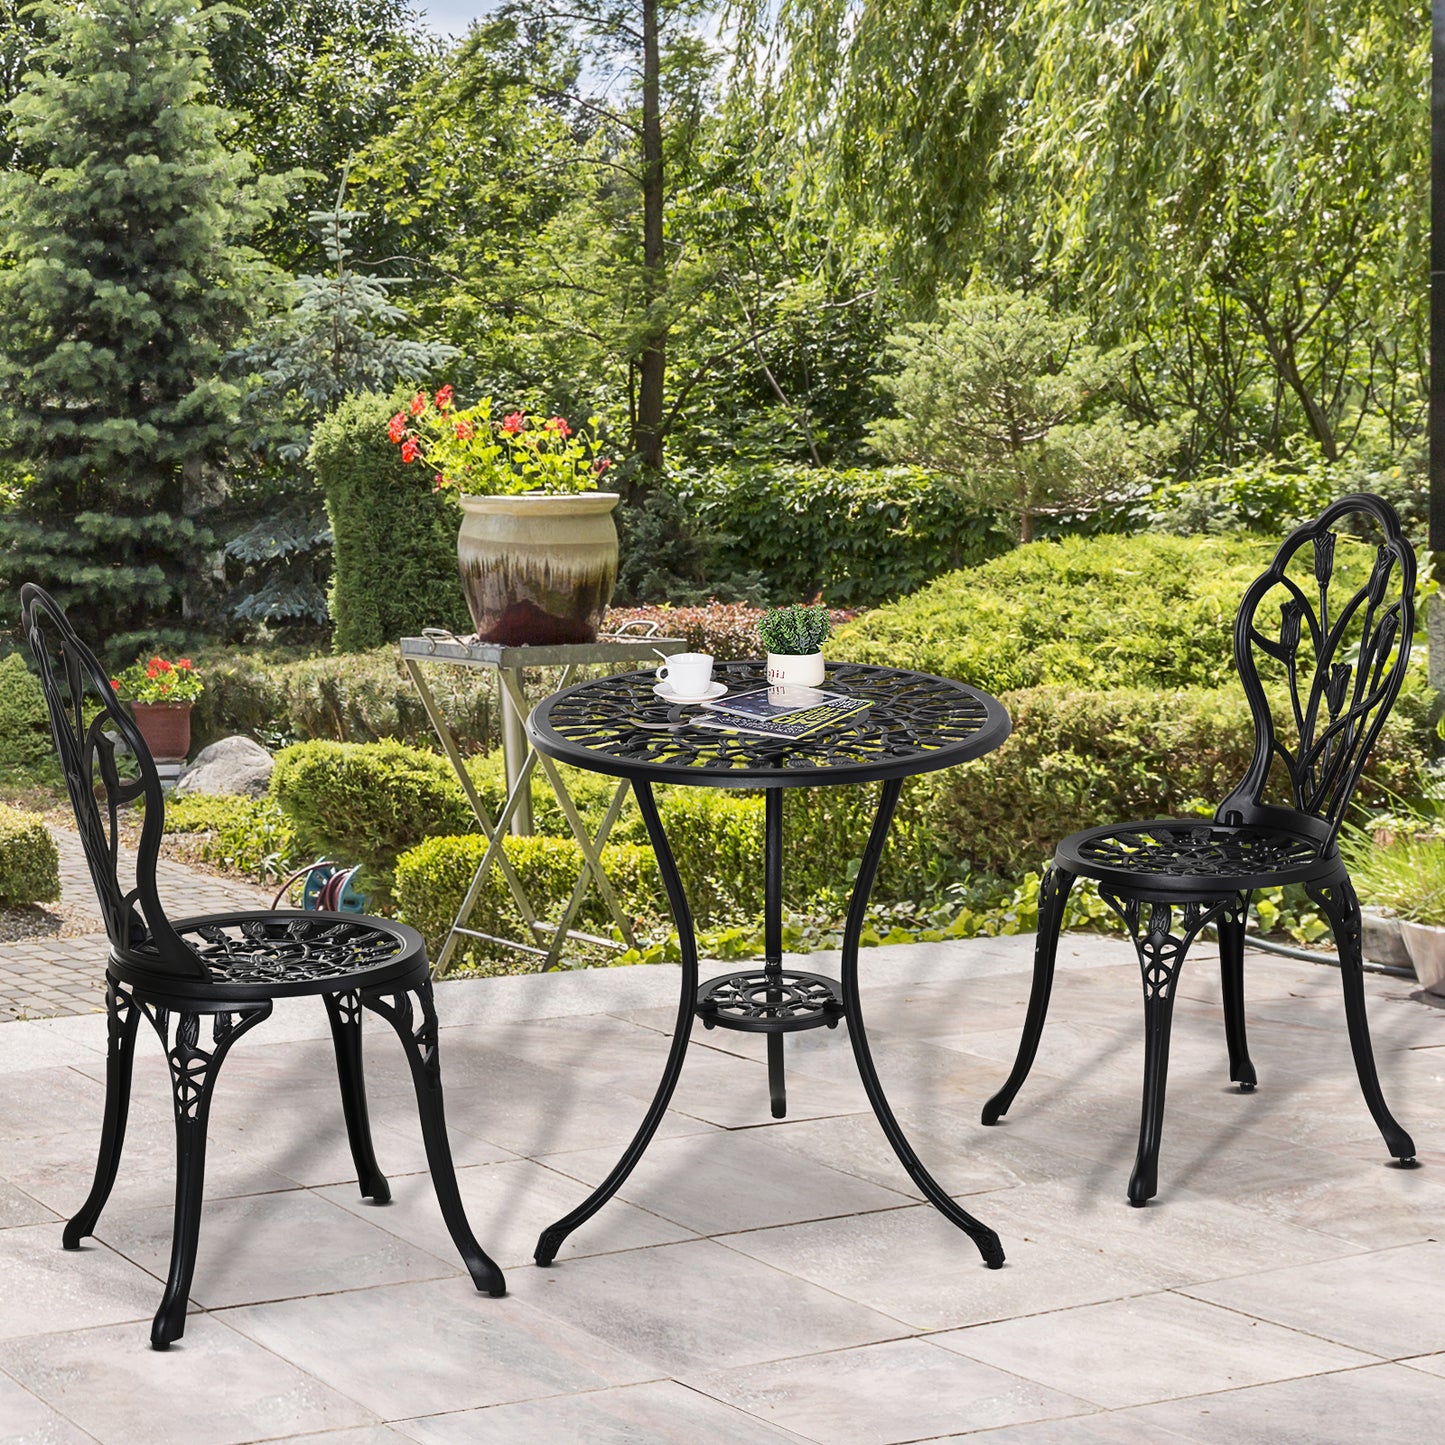 3-Piece Garden Set in Aluminum with 2 Chairs 42.5x47.5x89 cm and Round Table Ø60x67 cm, Black